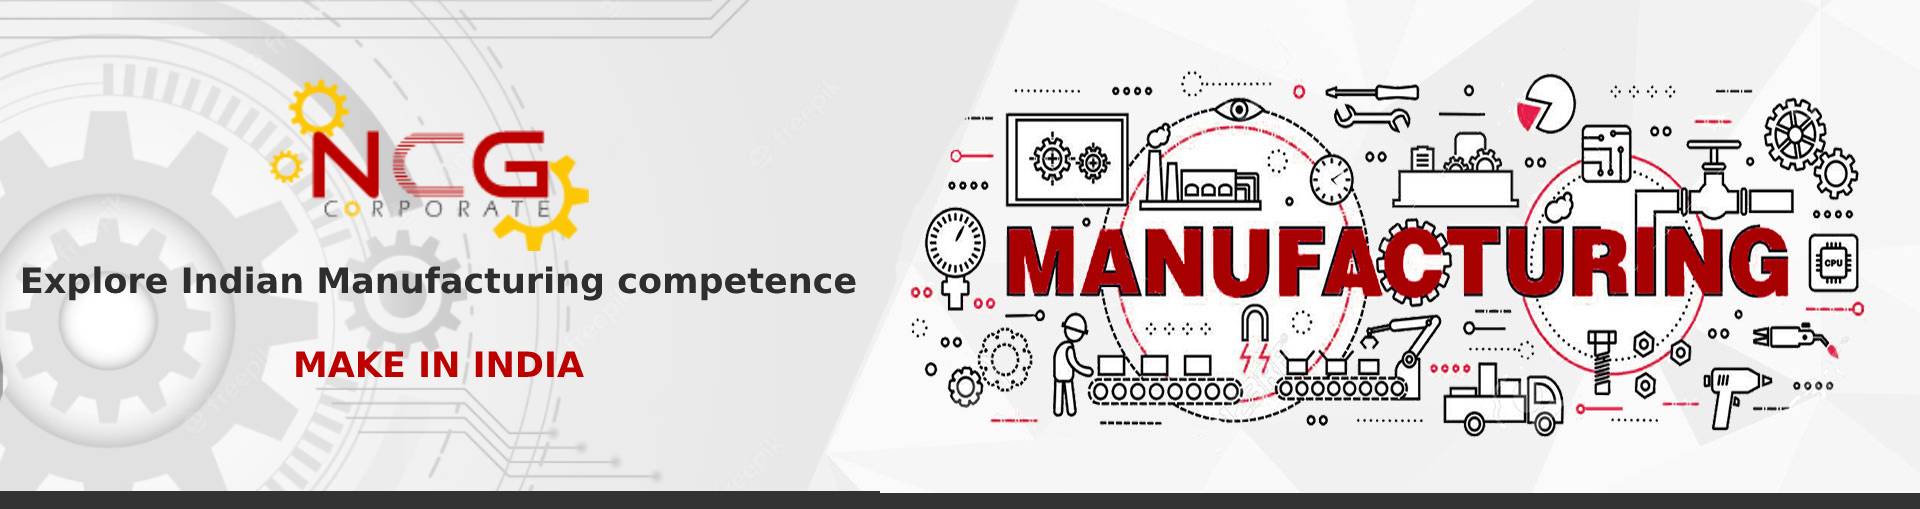 Explore Indian Manufacturing competence